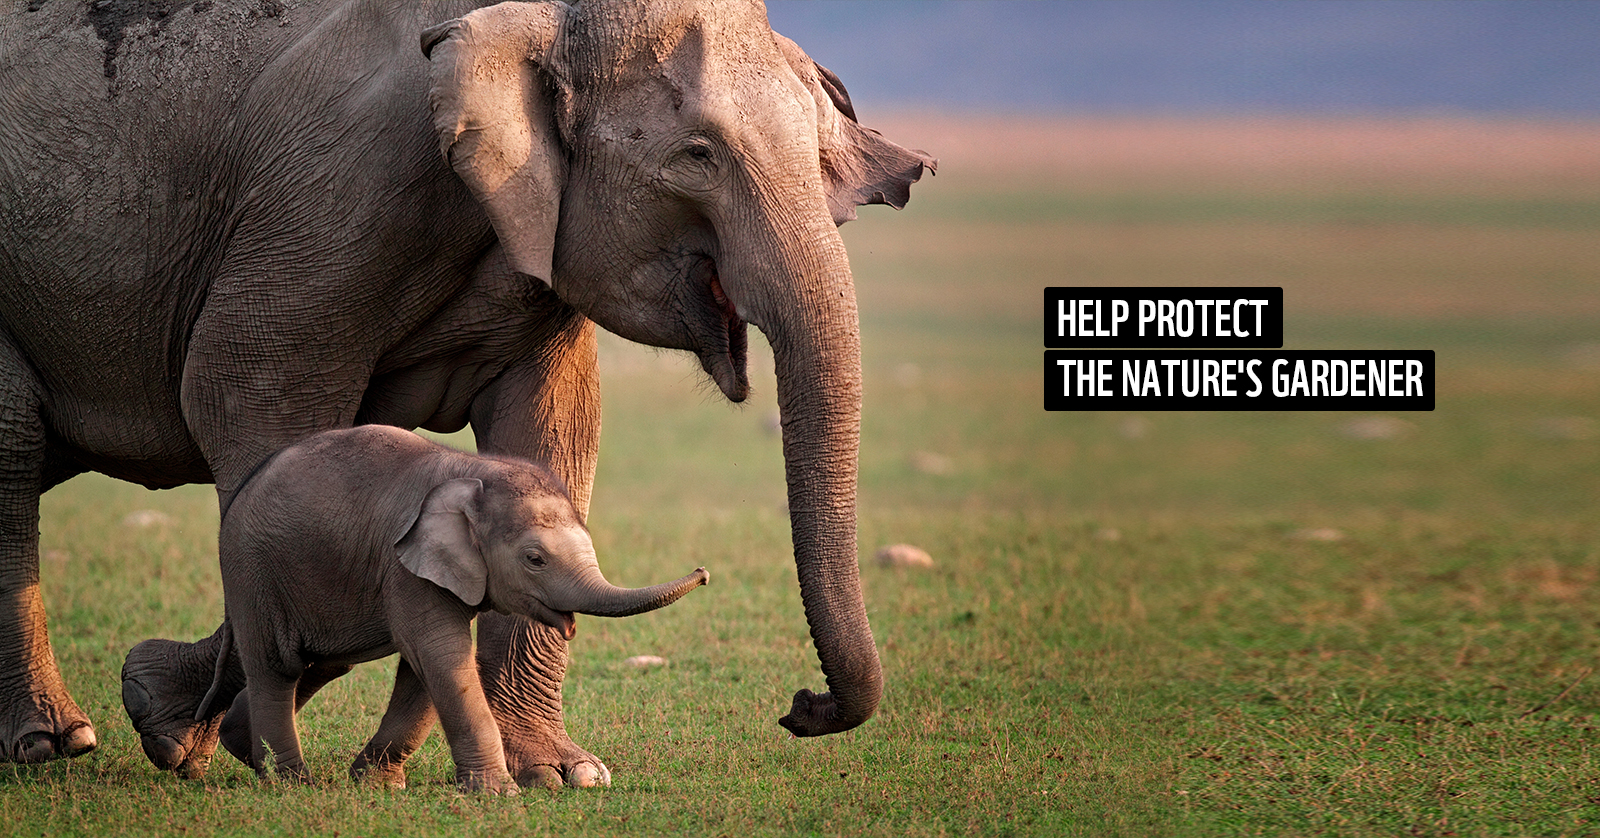 The call of the wild needs your voice to survive #nurturenature